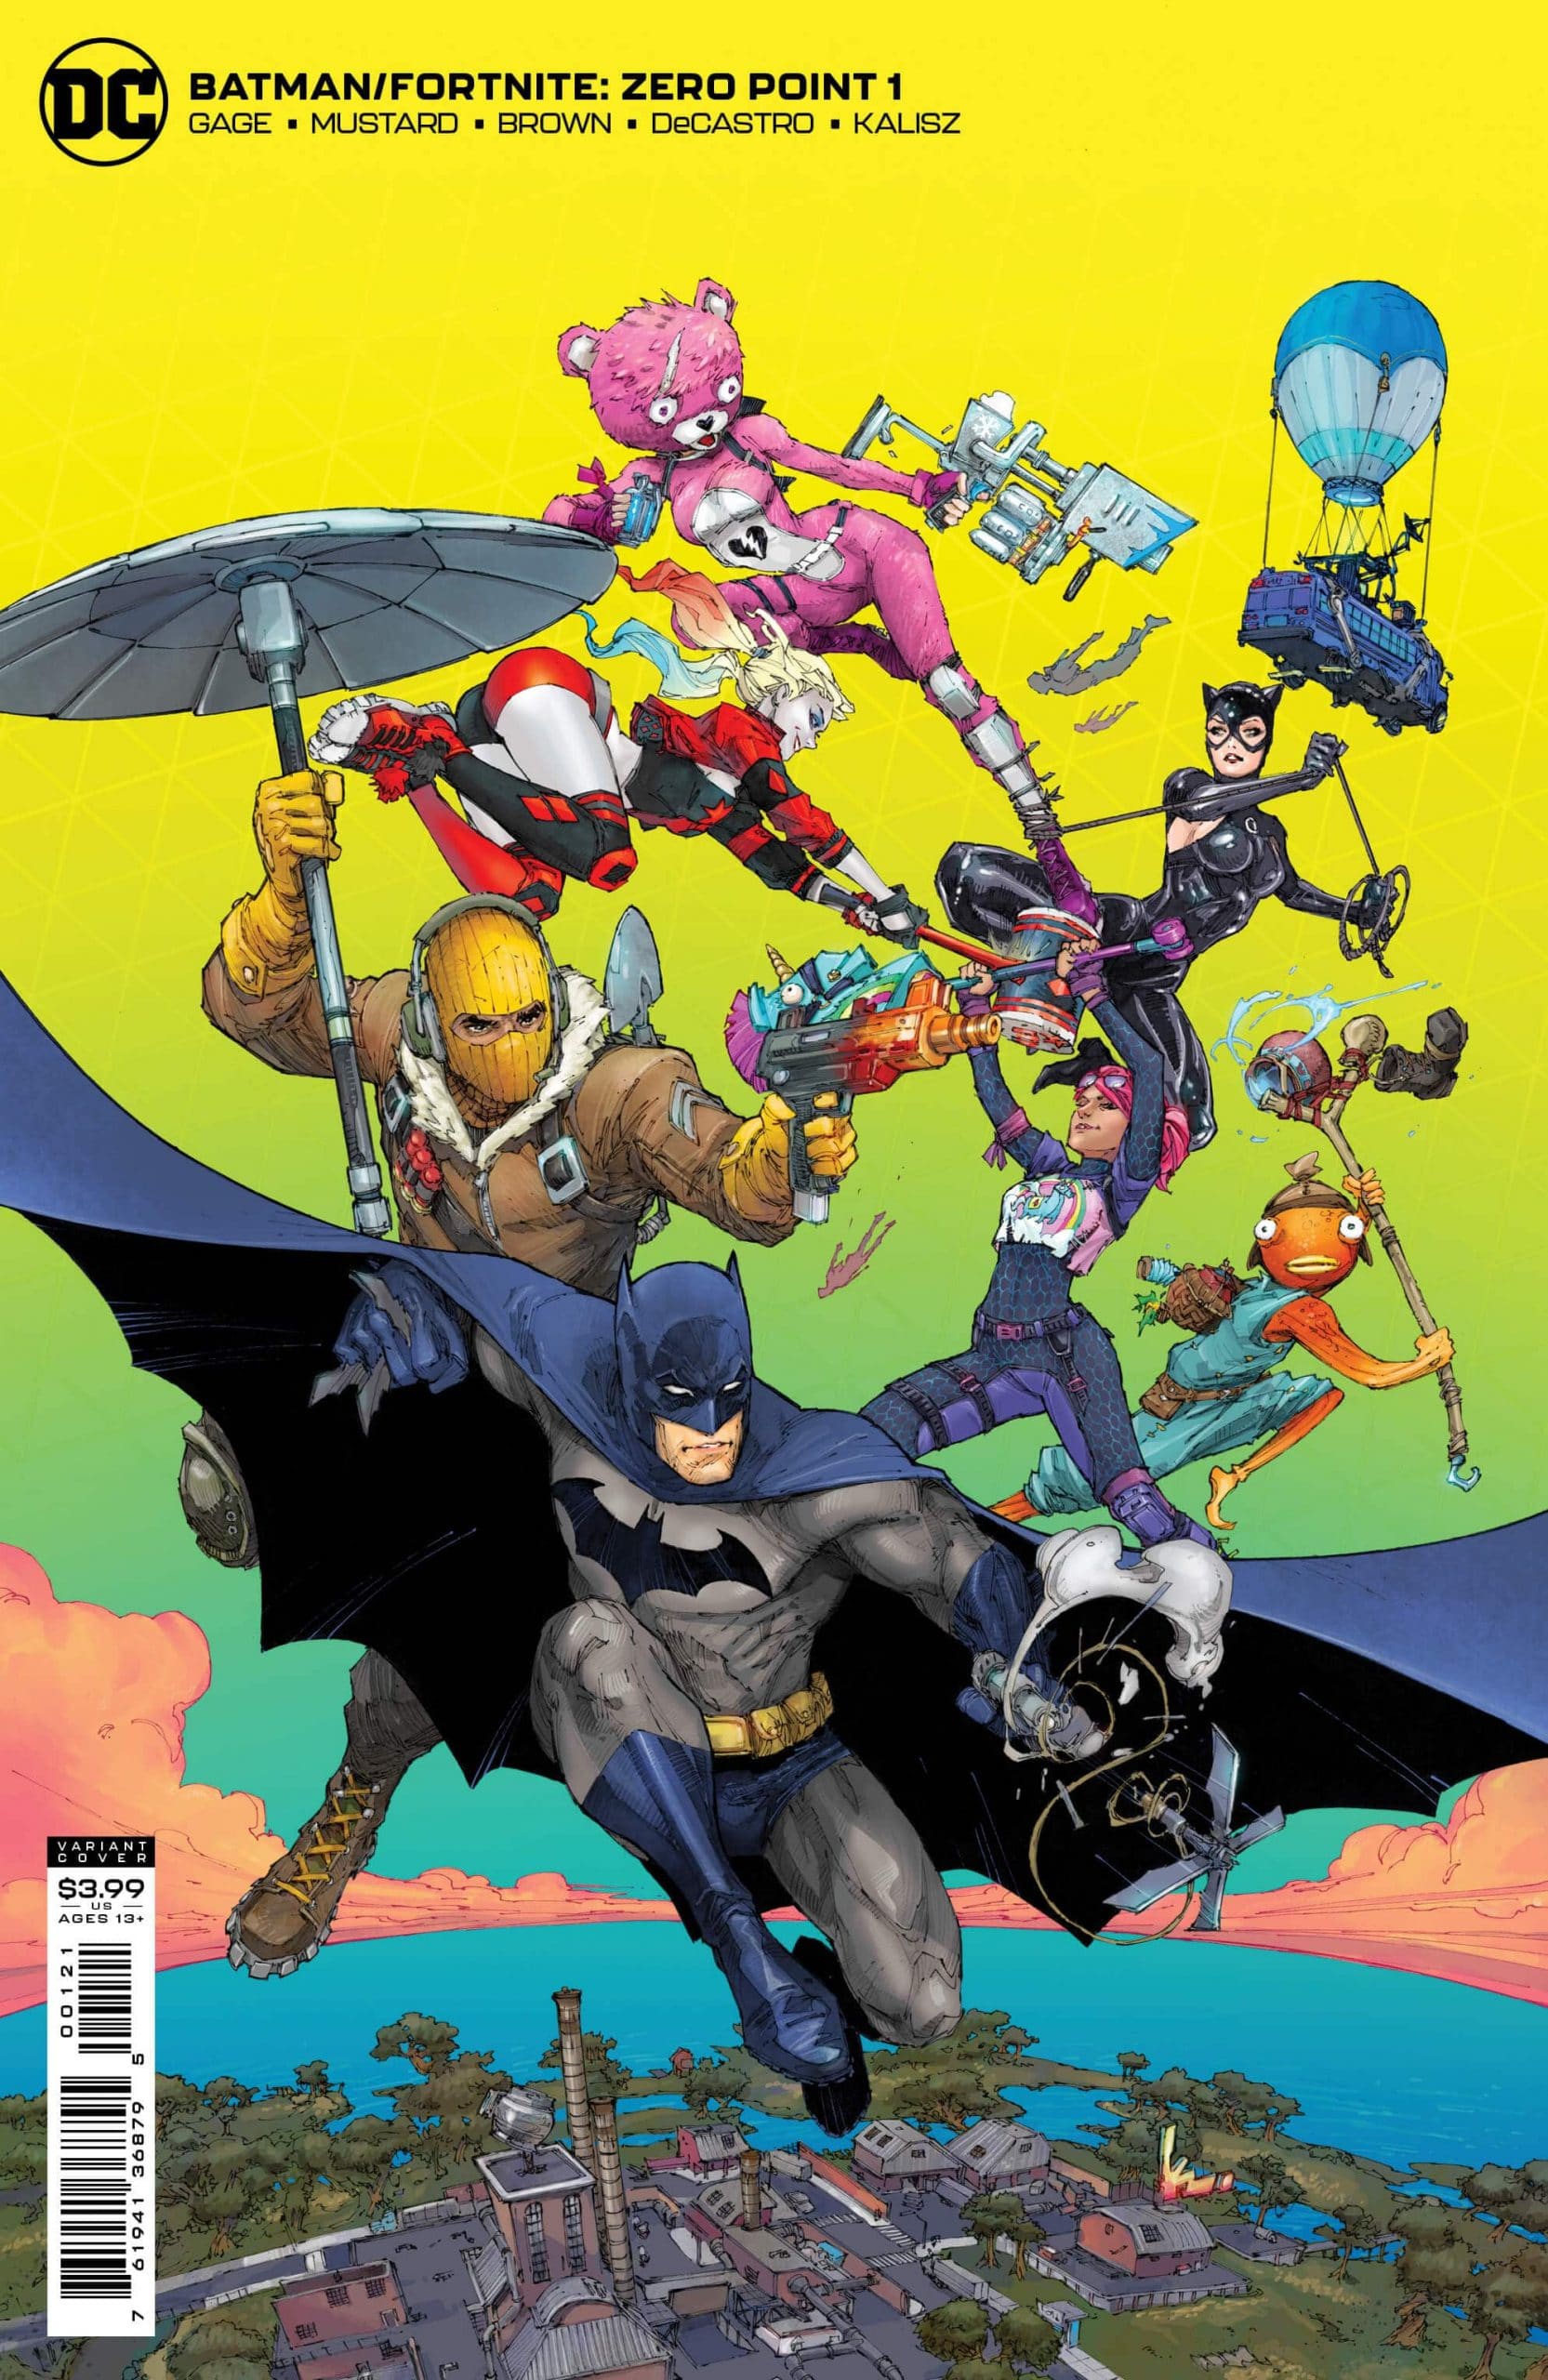 Batman/Fortnite: Zero Point comic - how to buy and receive the codes and the rewards